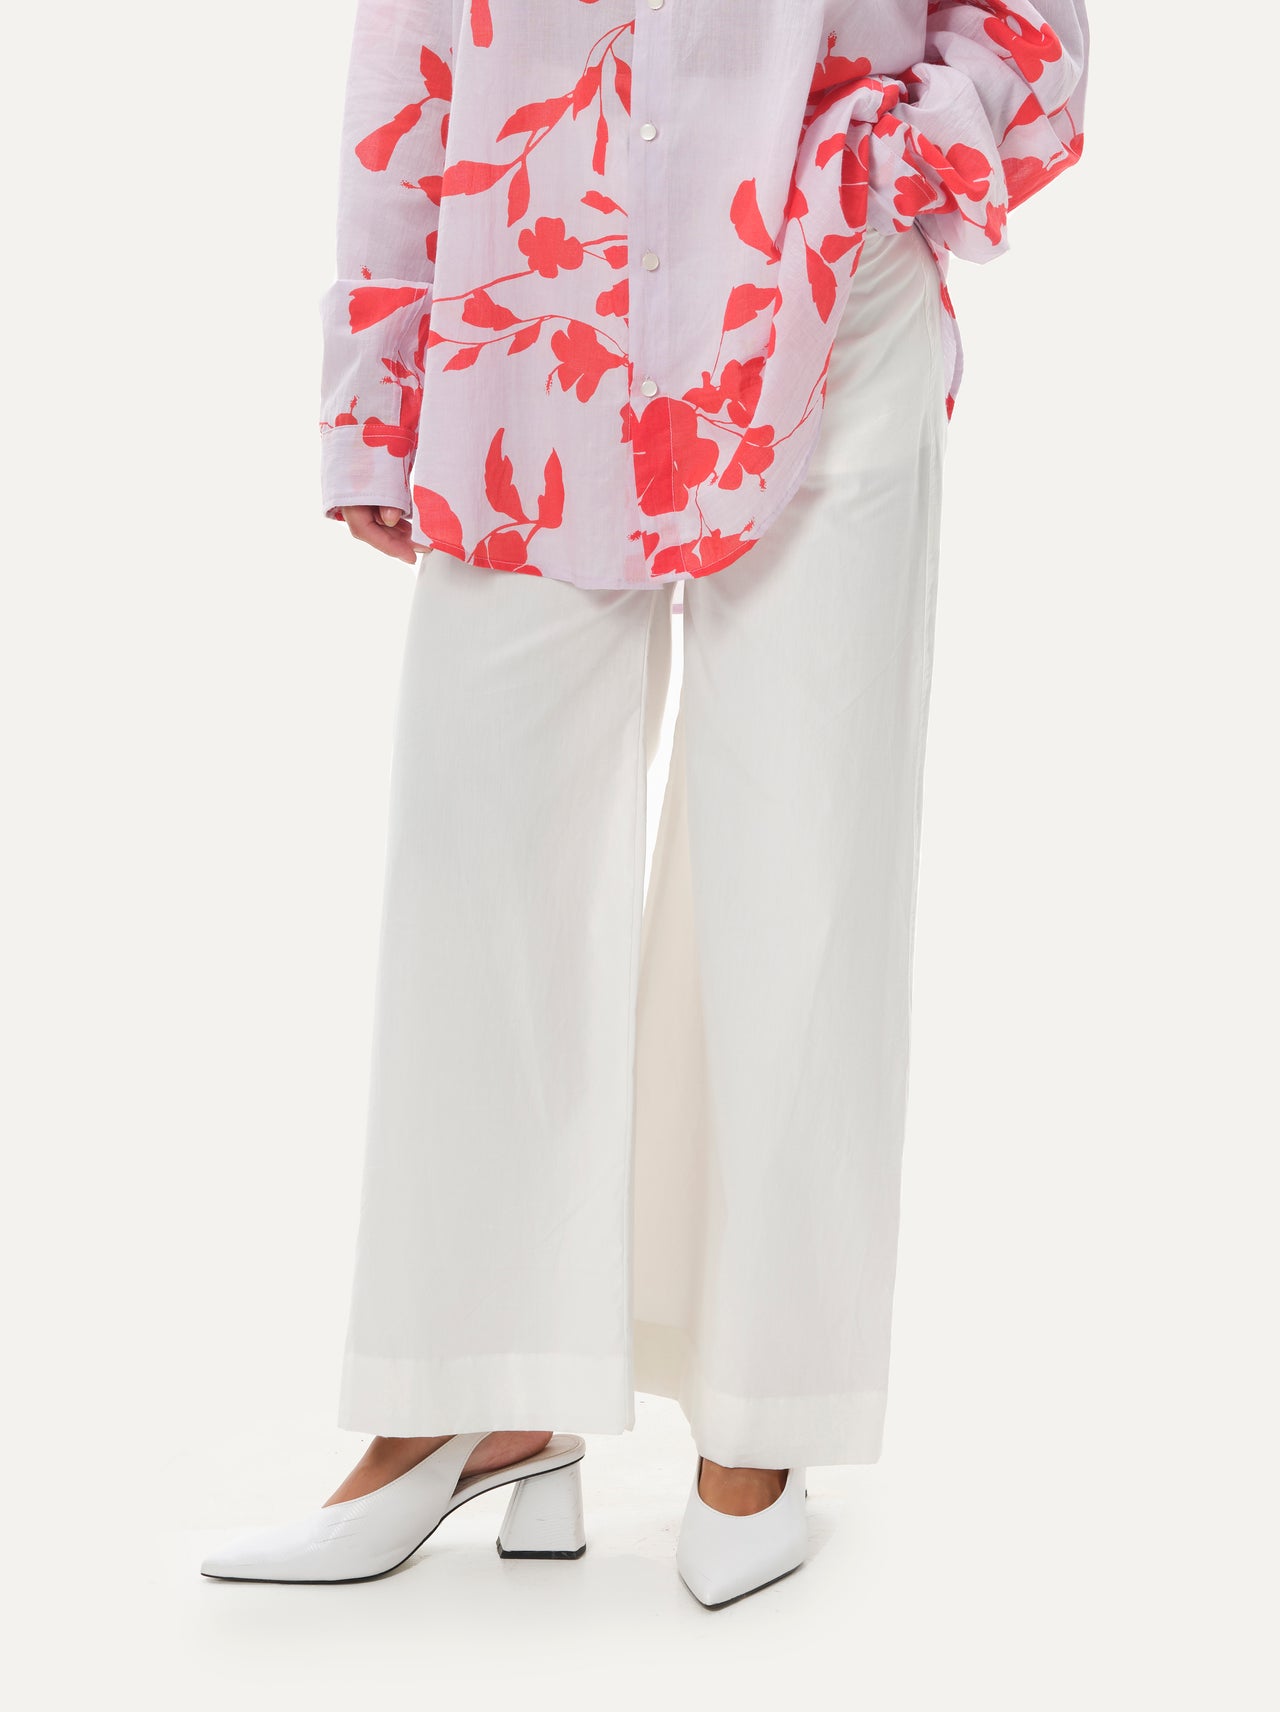 Ankle Pants - White